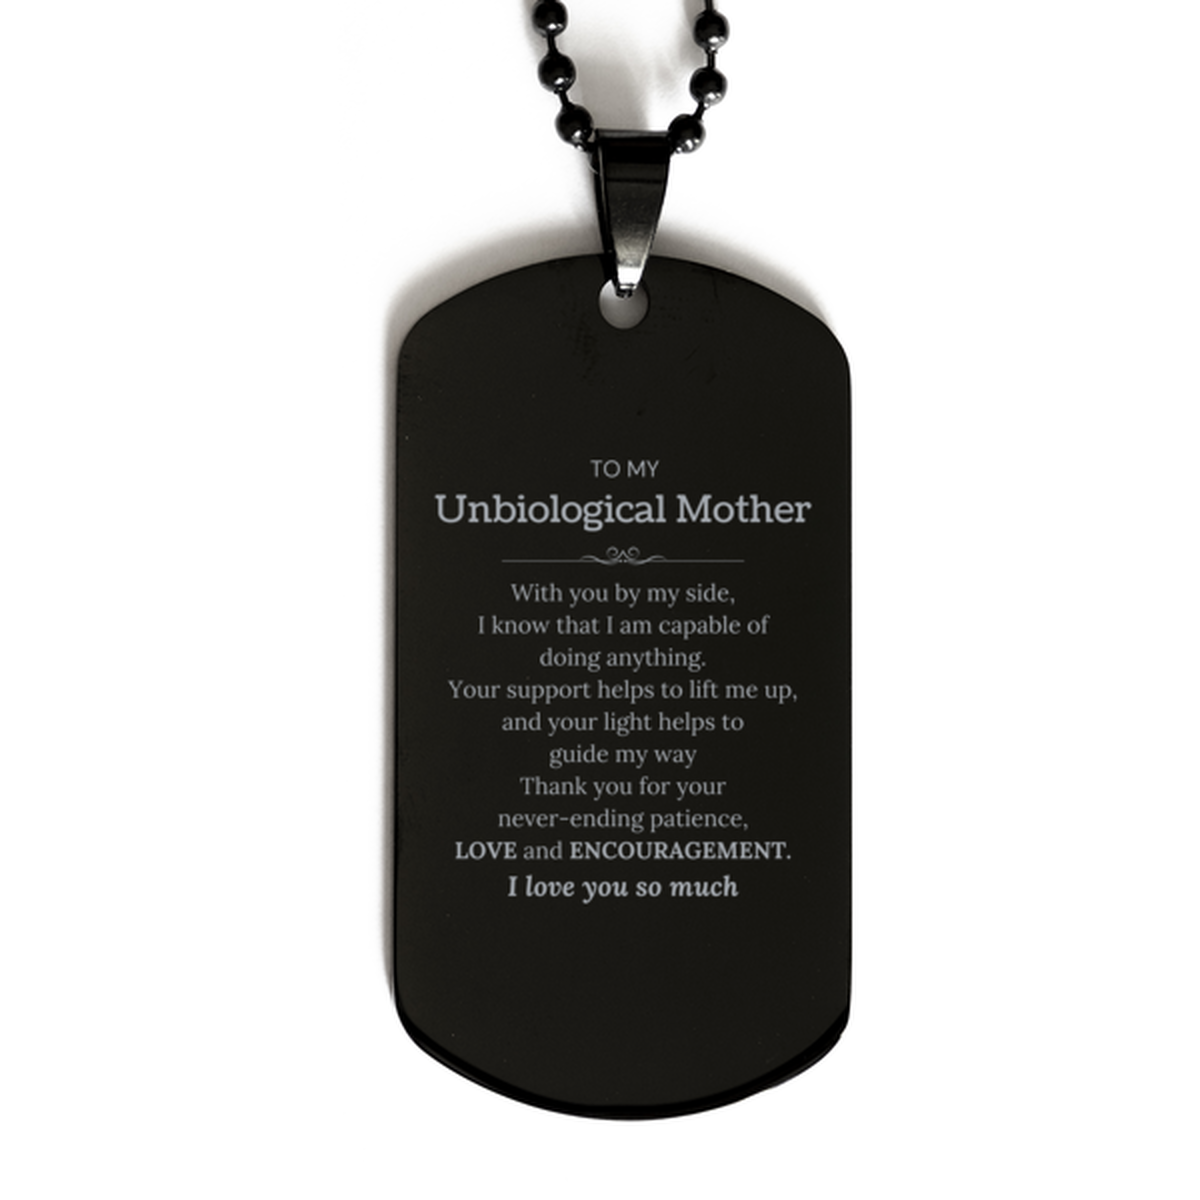 Appreciation Unbiological Mother Black Dog Tag Gifts, To My Unbiological Mother Birthday Christmas Wedding Keepsake Gifts for Unbiological Mother With you by my side, I know that I am capable of doing anything. I love you so much